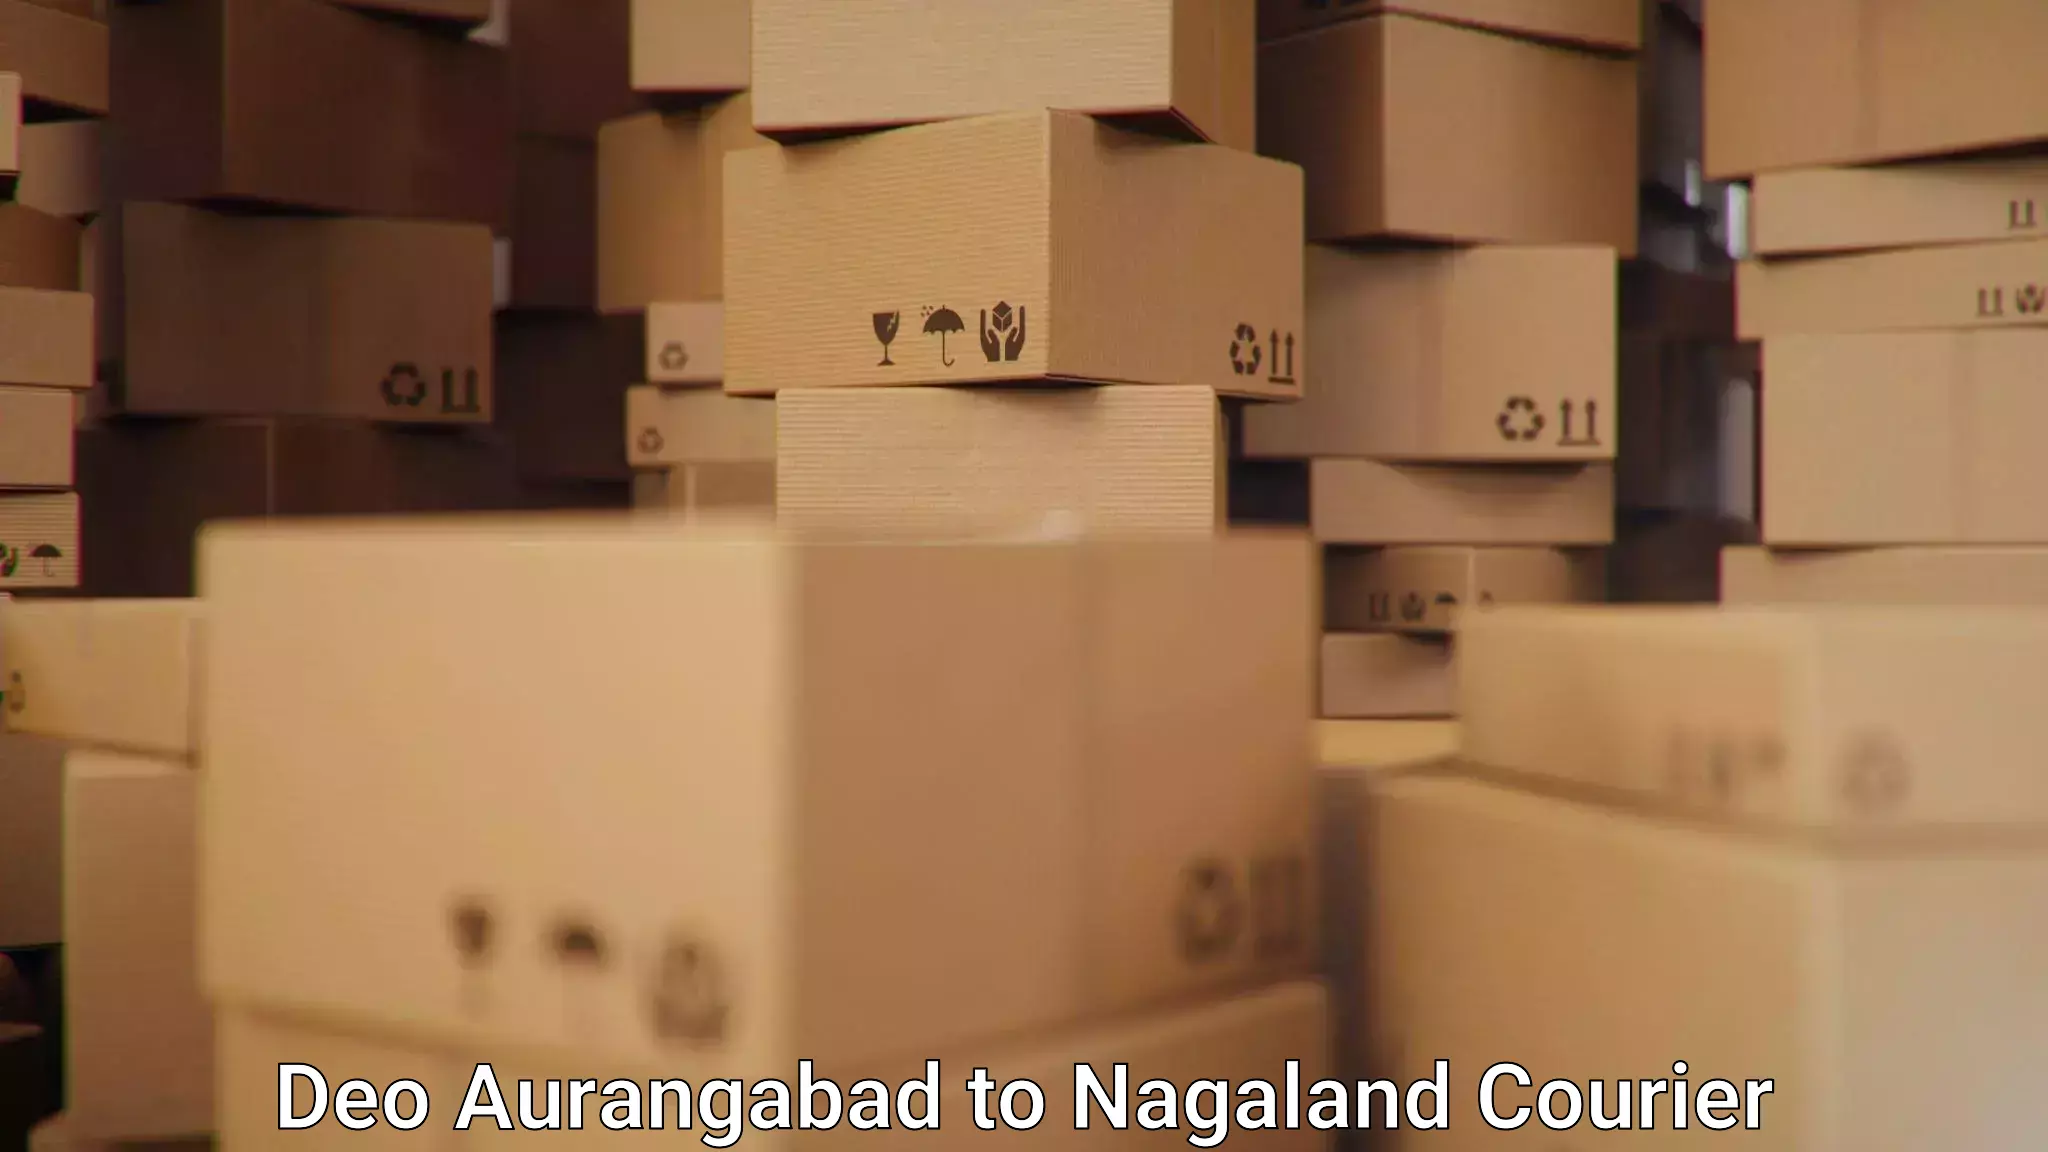 Large-scale shipping solutions Deo Aurangabad to Mon